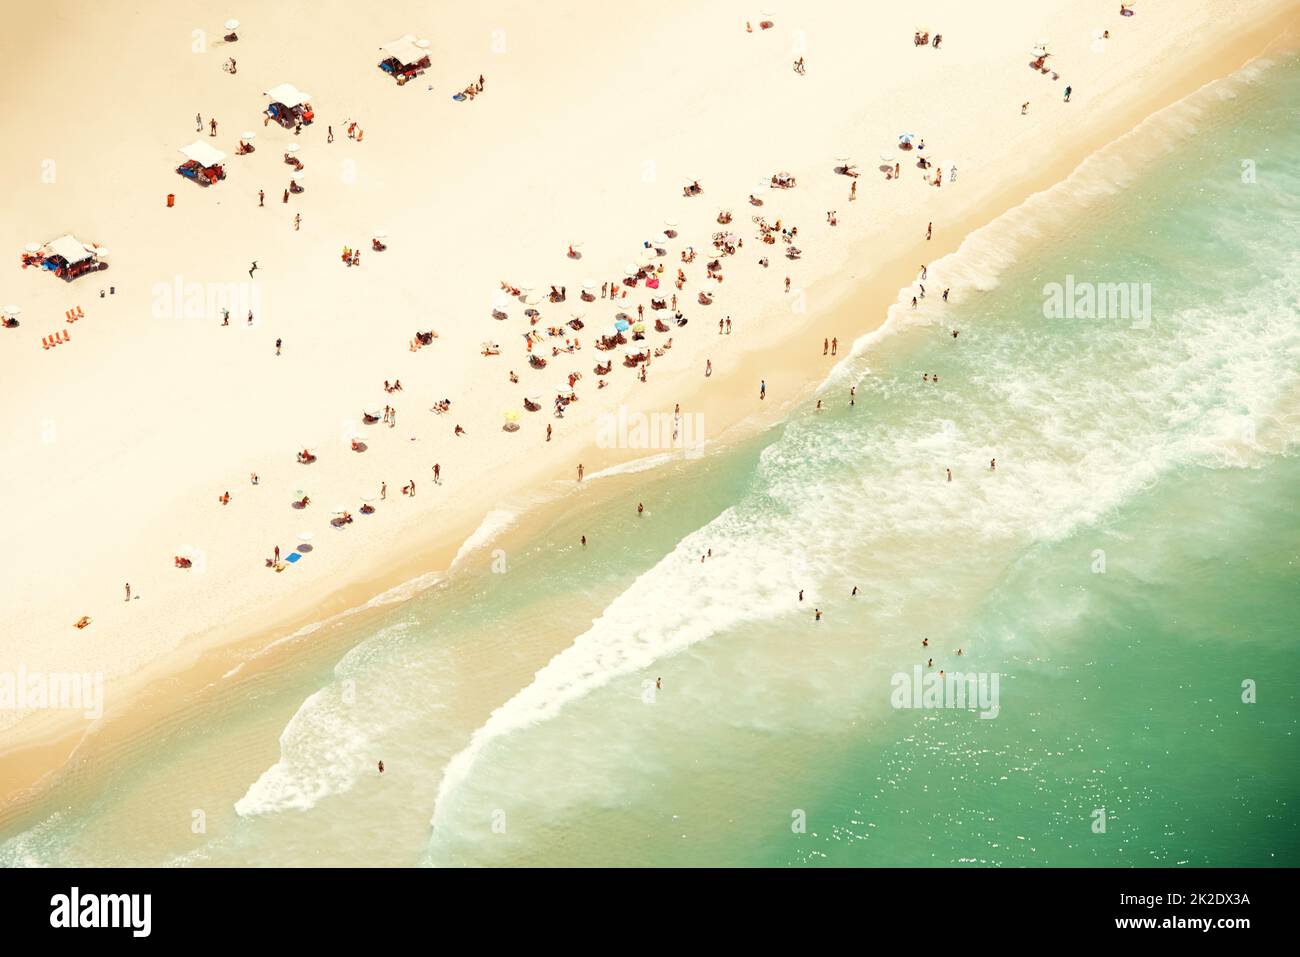 Here to catch some waves and rays. A aerial view of the beaches in Rio de Janeiro, Brazil. Stock Photo